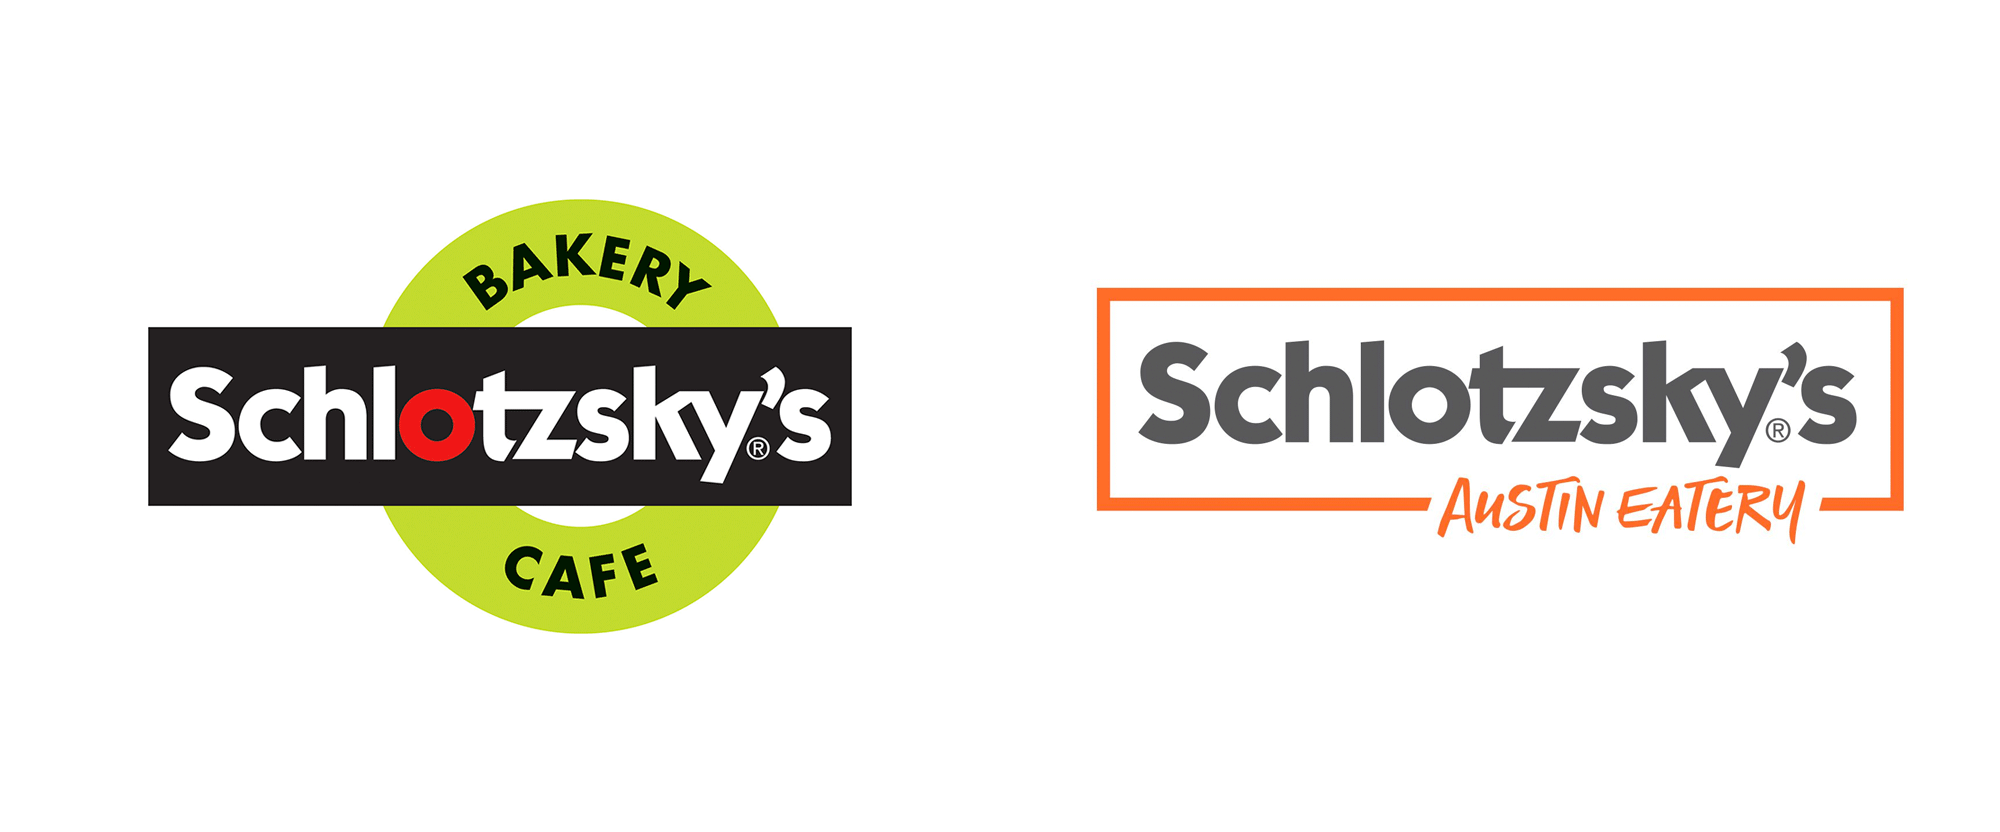 New Name and Logo for Schlotzky’s Austin Eatery